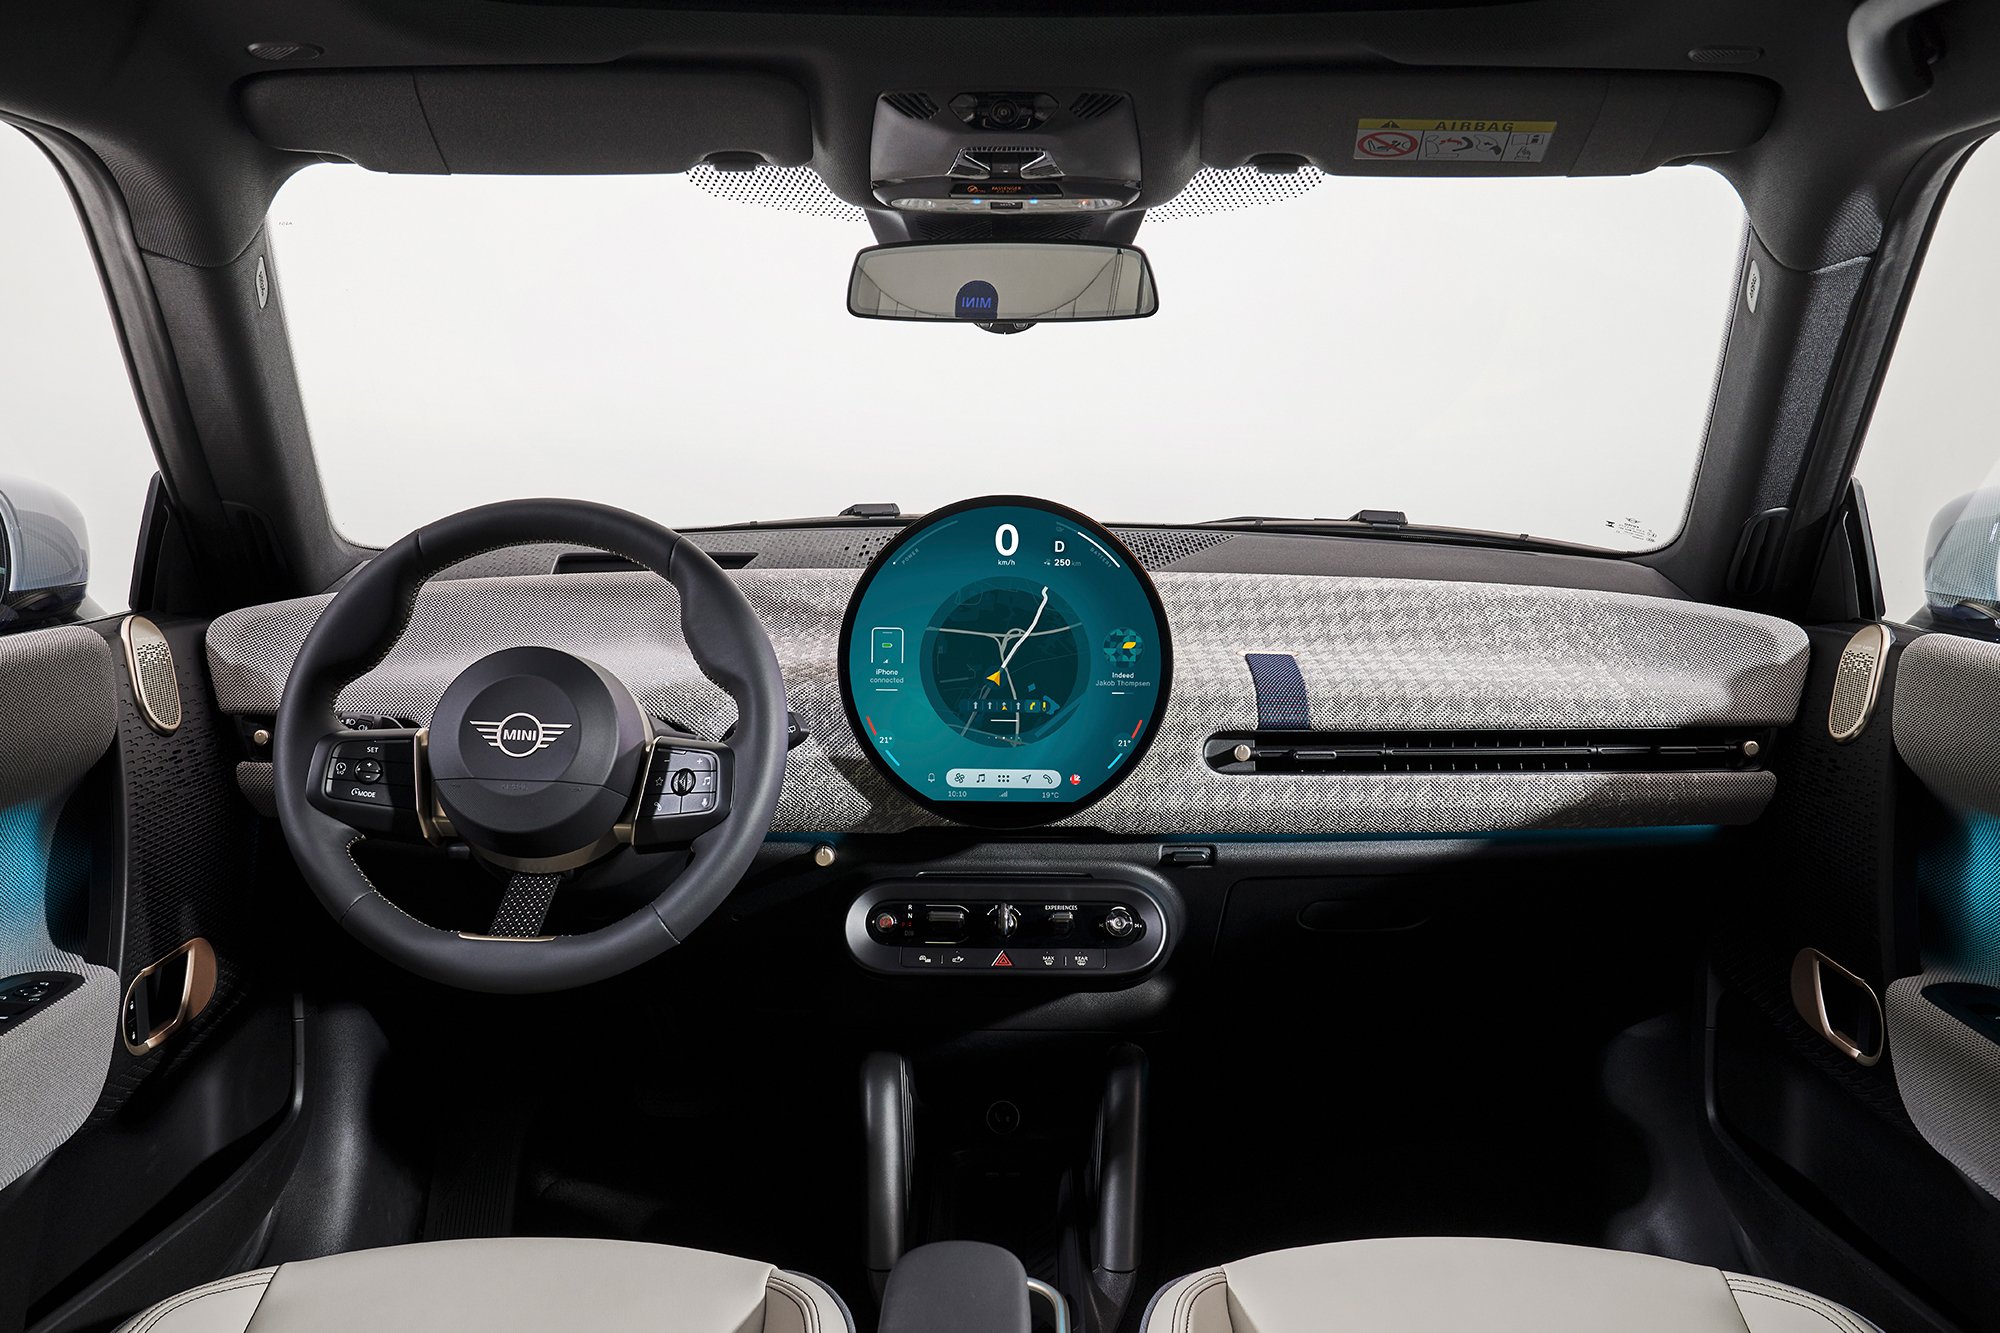 The front seat and dashboard design of the new all-electric MINI Cooper 